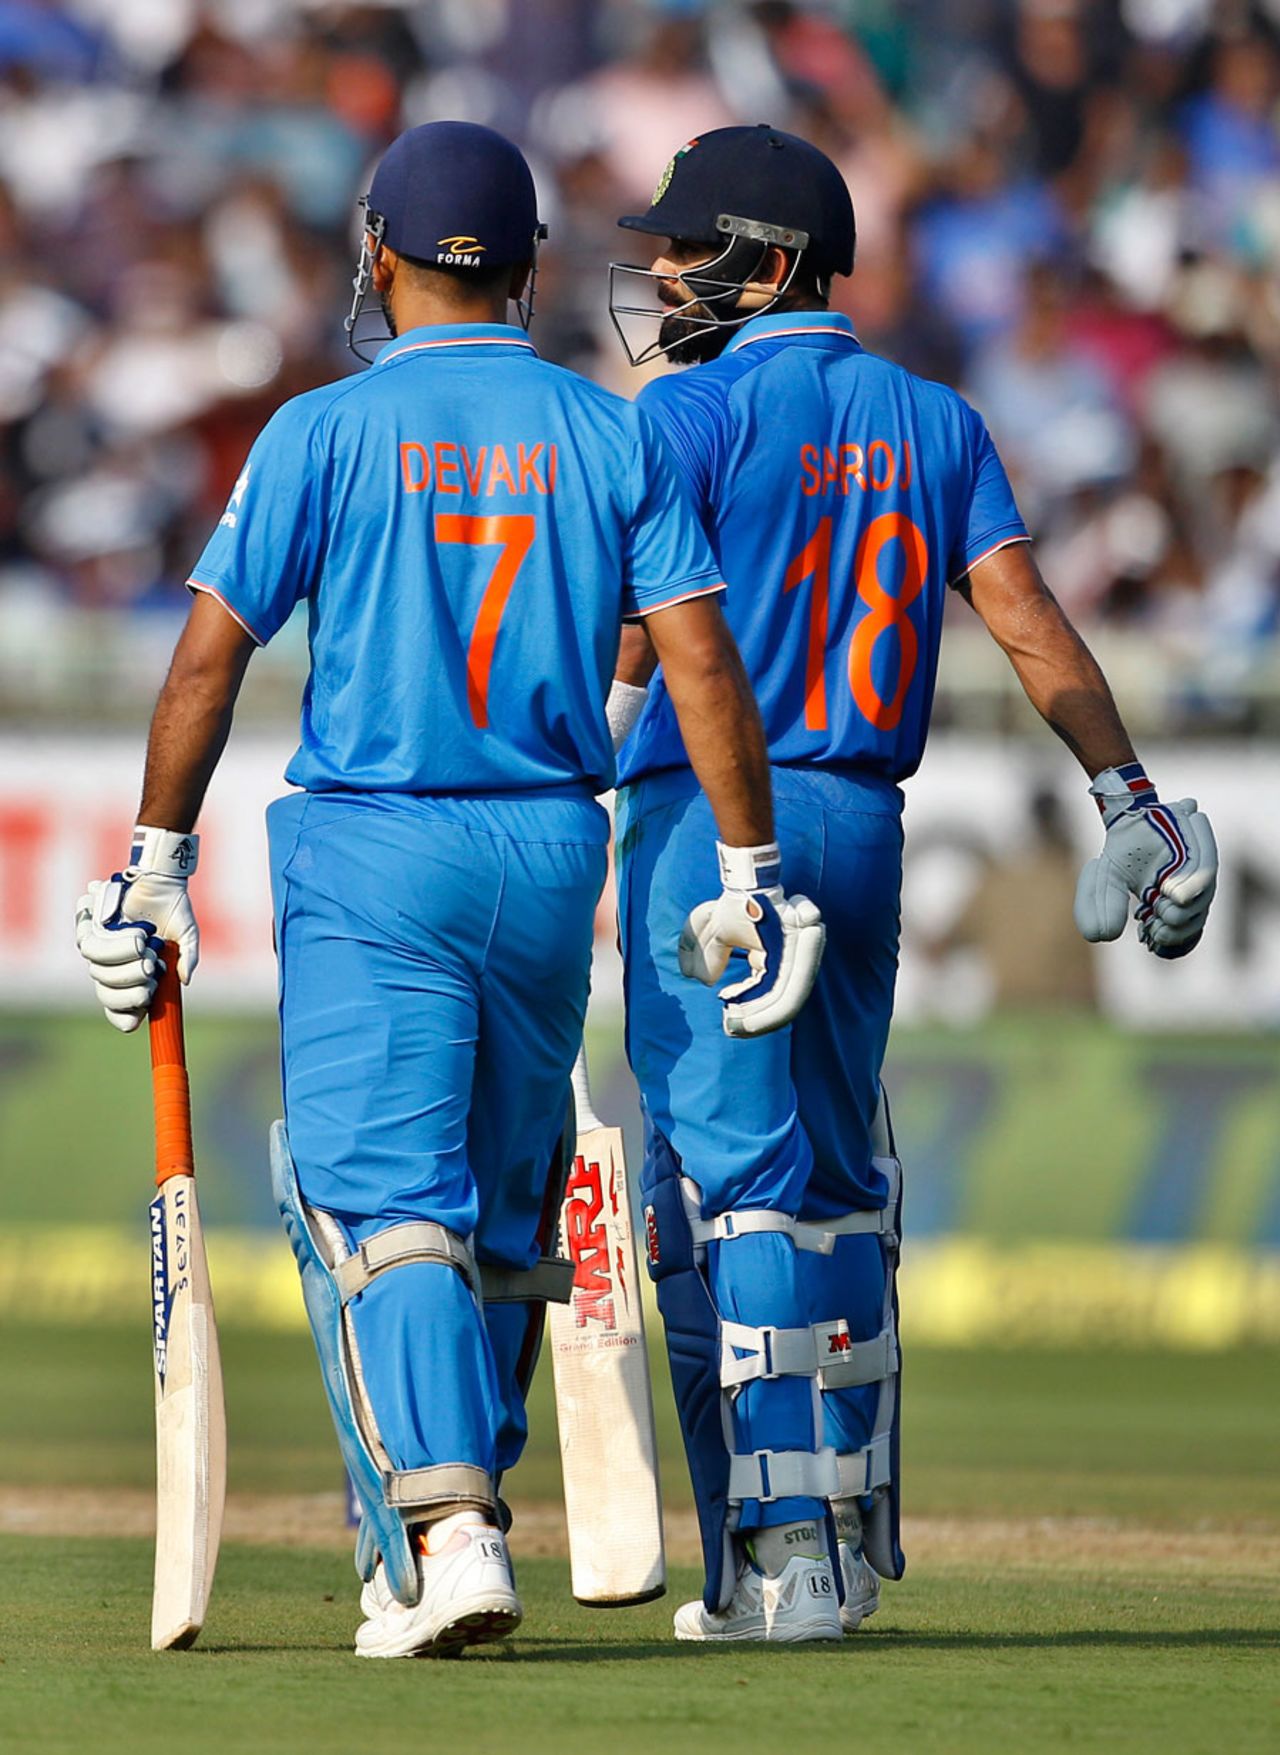 MS Dhoni and Virat Kohli (seen here wearing shirts bearing their mothers' names) added 71 in partnership, India v New Zealand, 5th ODI, Visakhapatnam, October 29, 2016